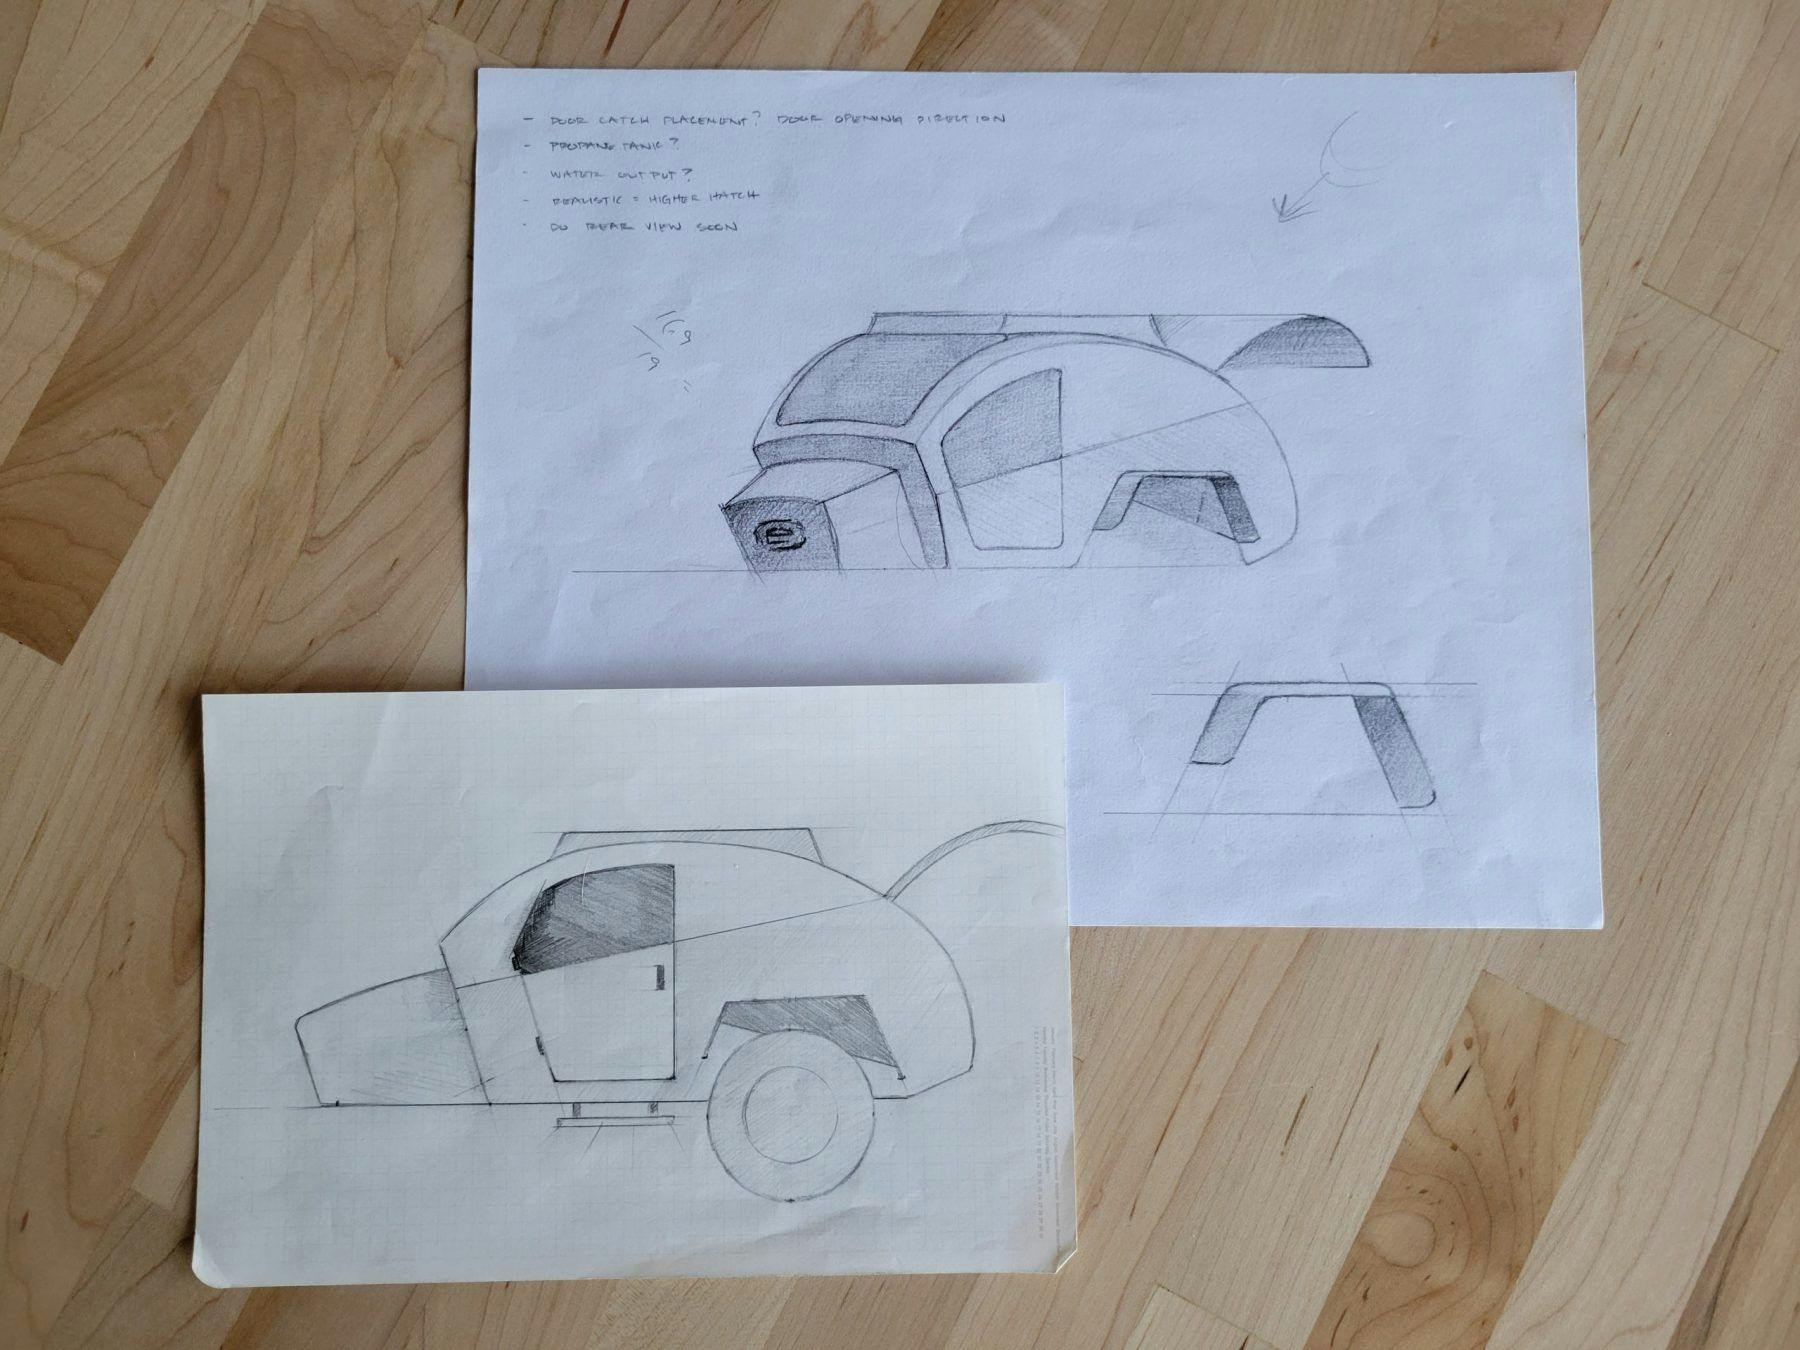 Sketches of the TOPO2 in its early development stages.